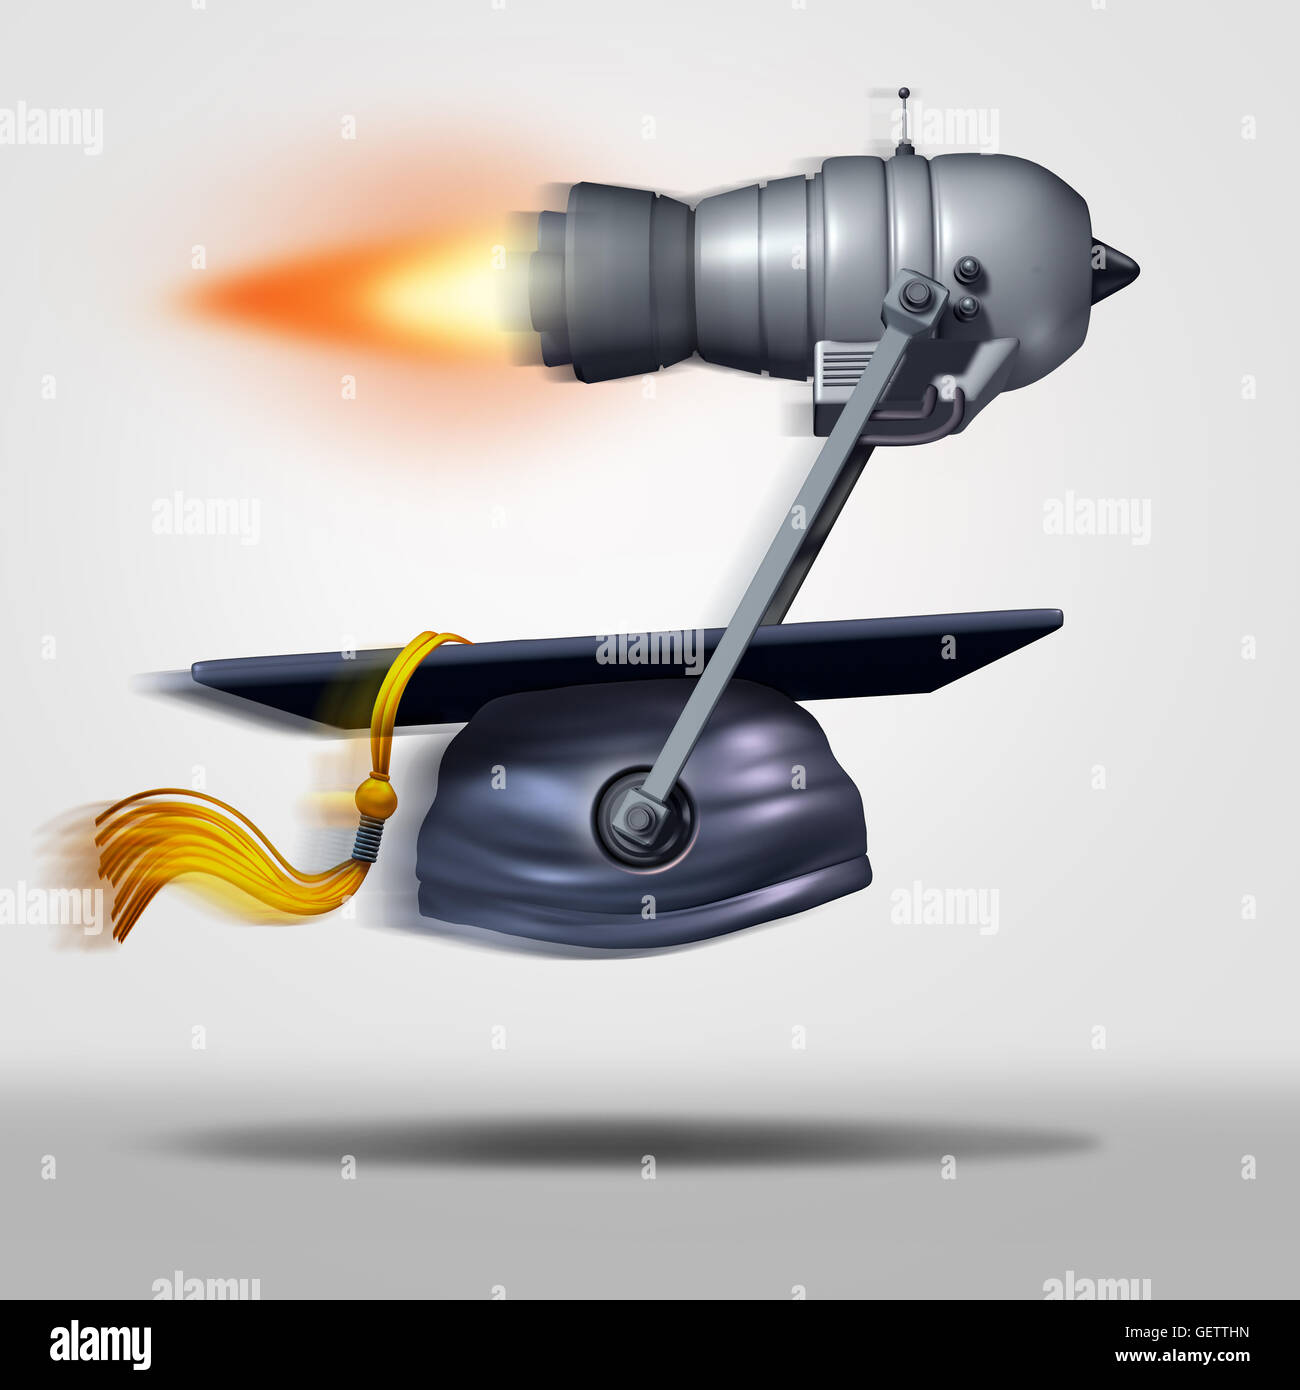 Learn faster and fast education or speed learning concept as a jet engine moving a graduation cap as a metaphor for rapid student success or career goals as a 3D illustration. Stock Photo